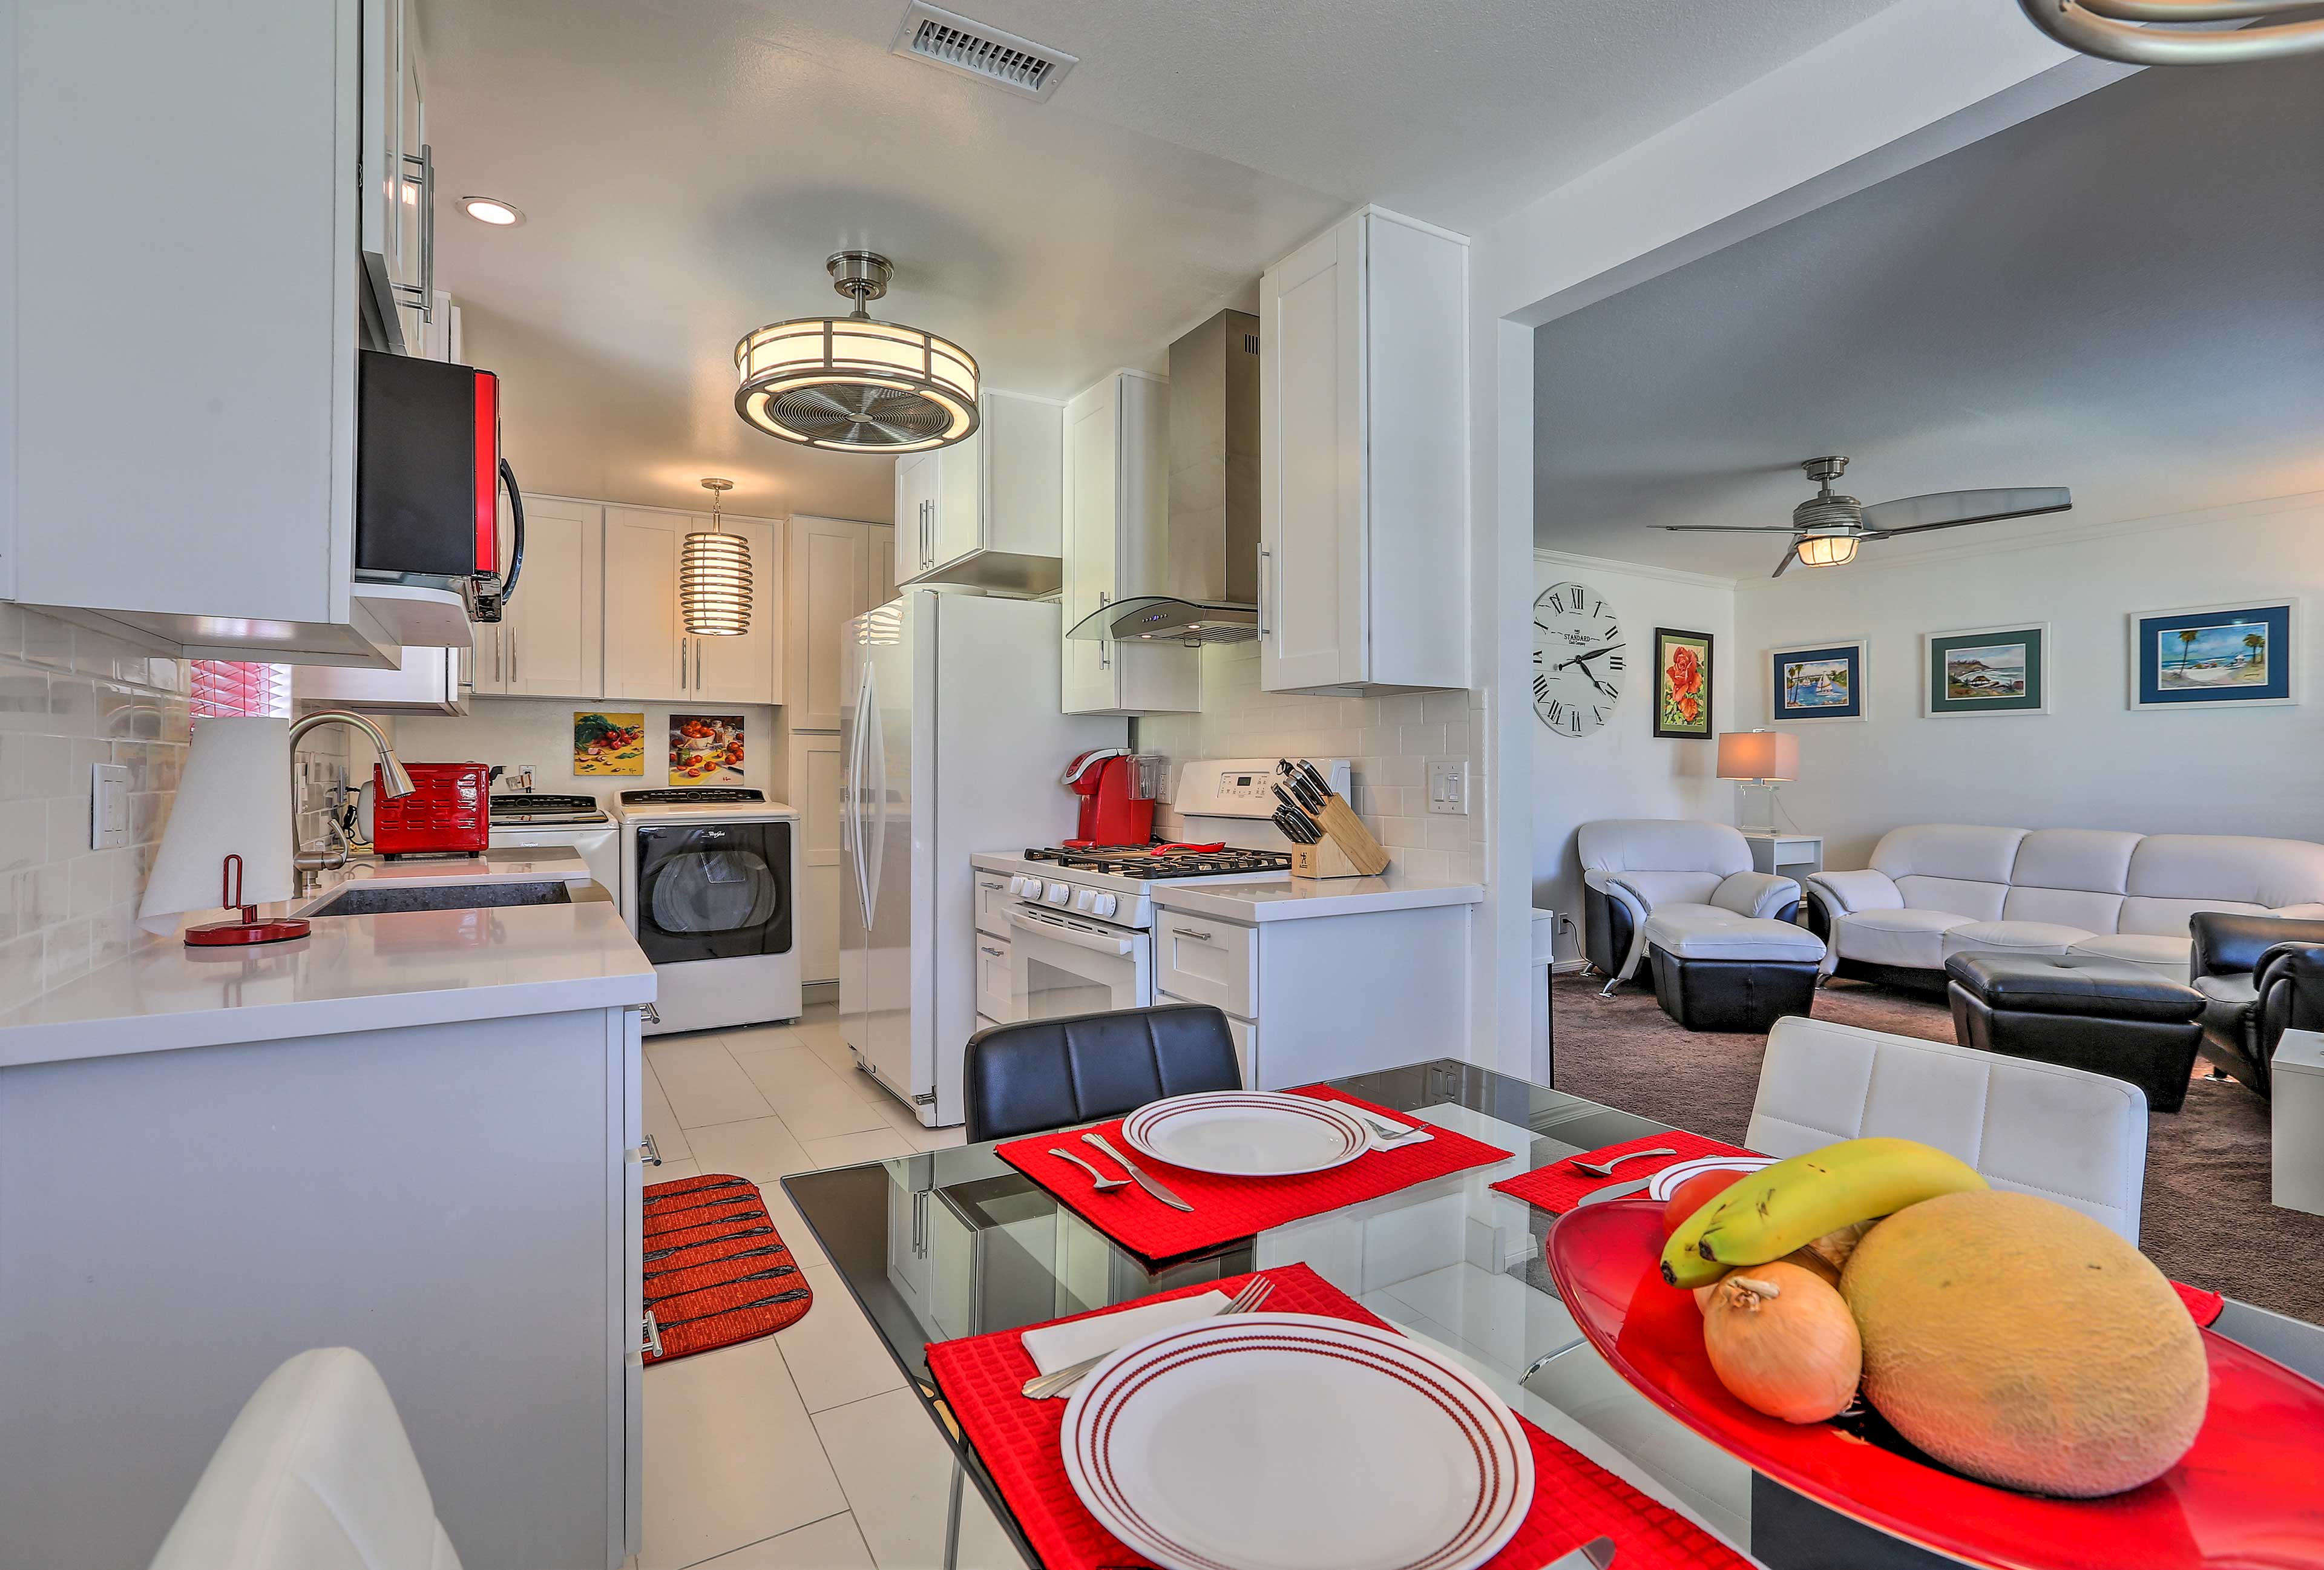 Red appliances and decor accent the white-themed dining and kitchen areas.